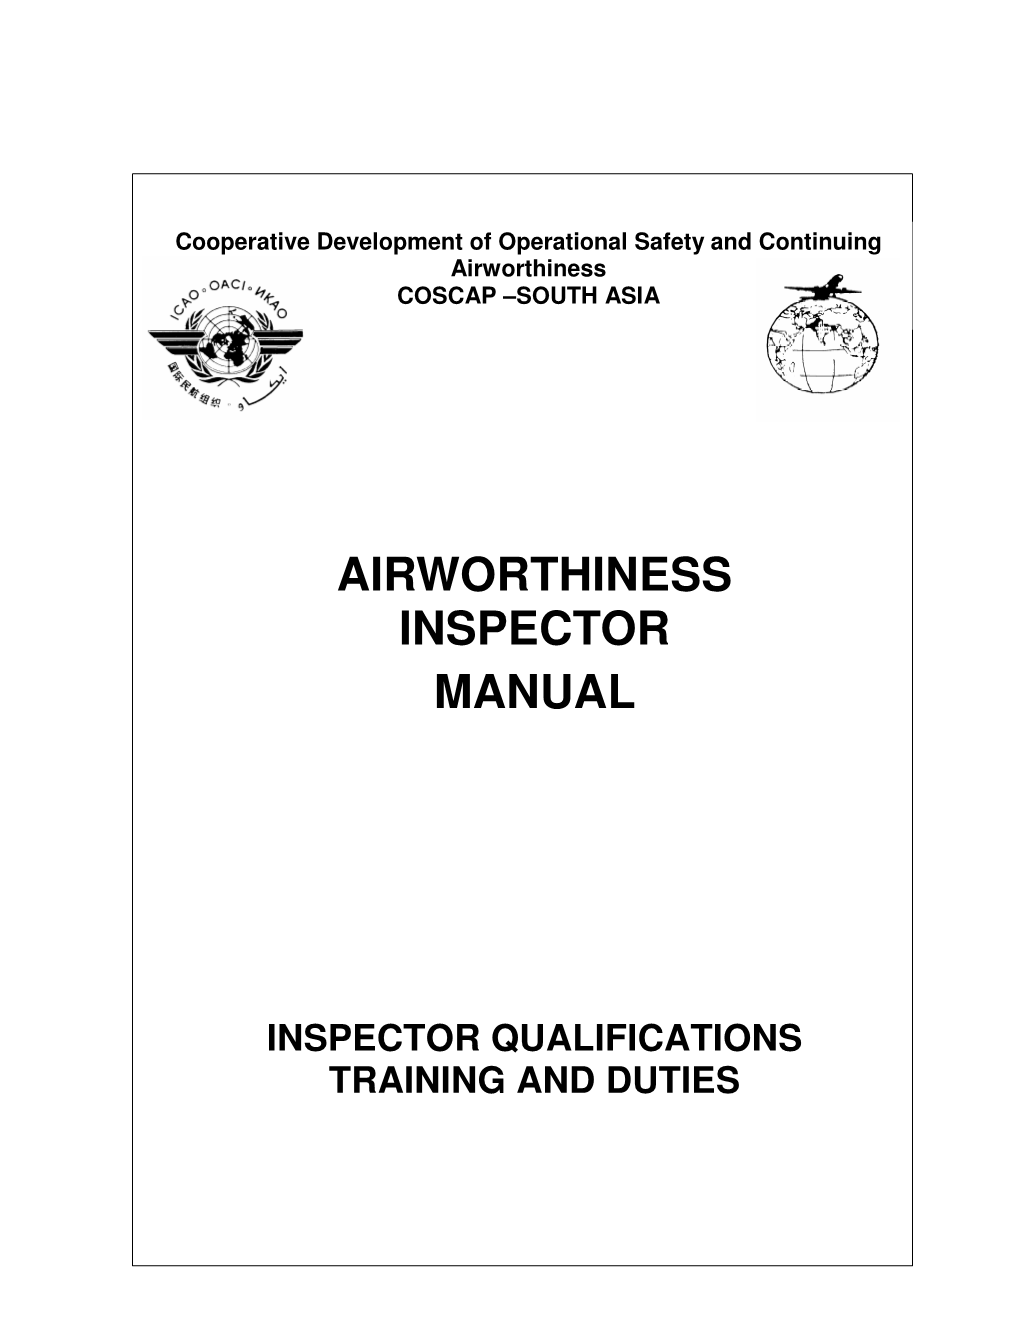 Airworthiness Inspector Manual